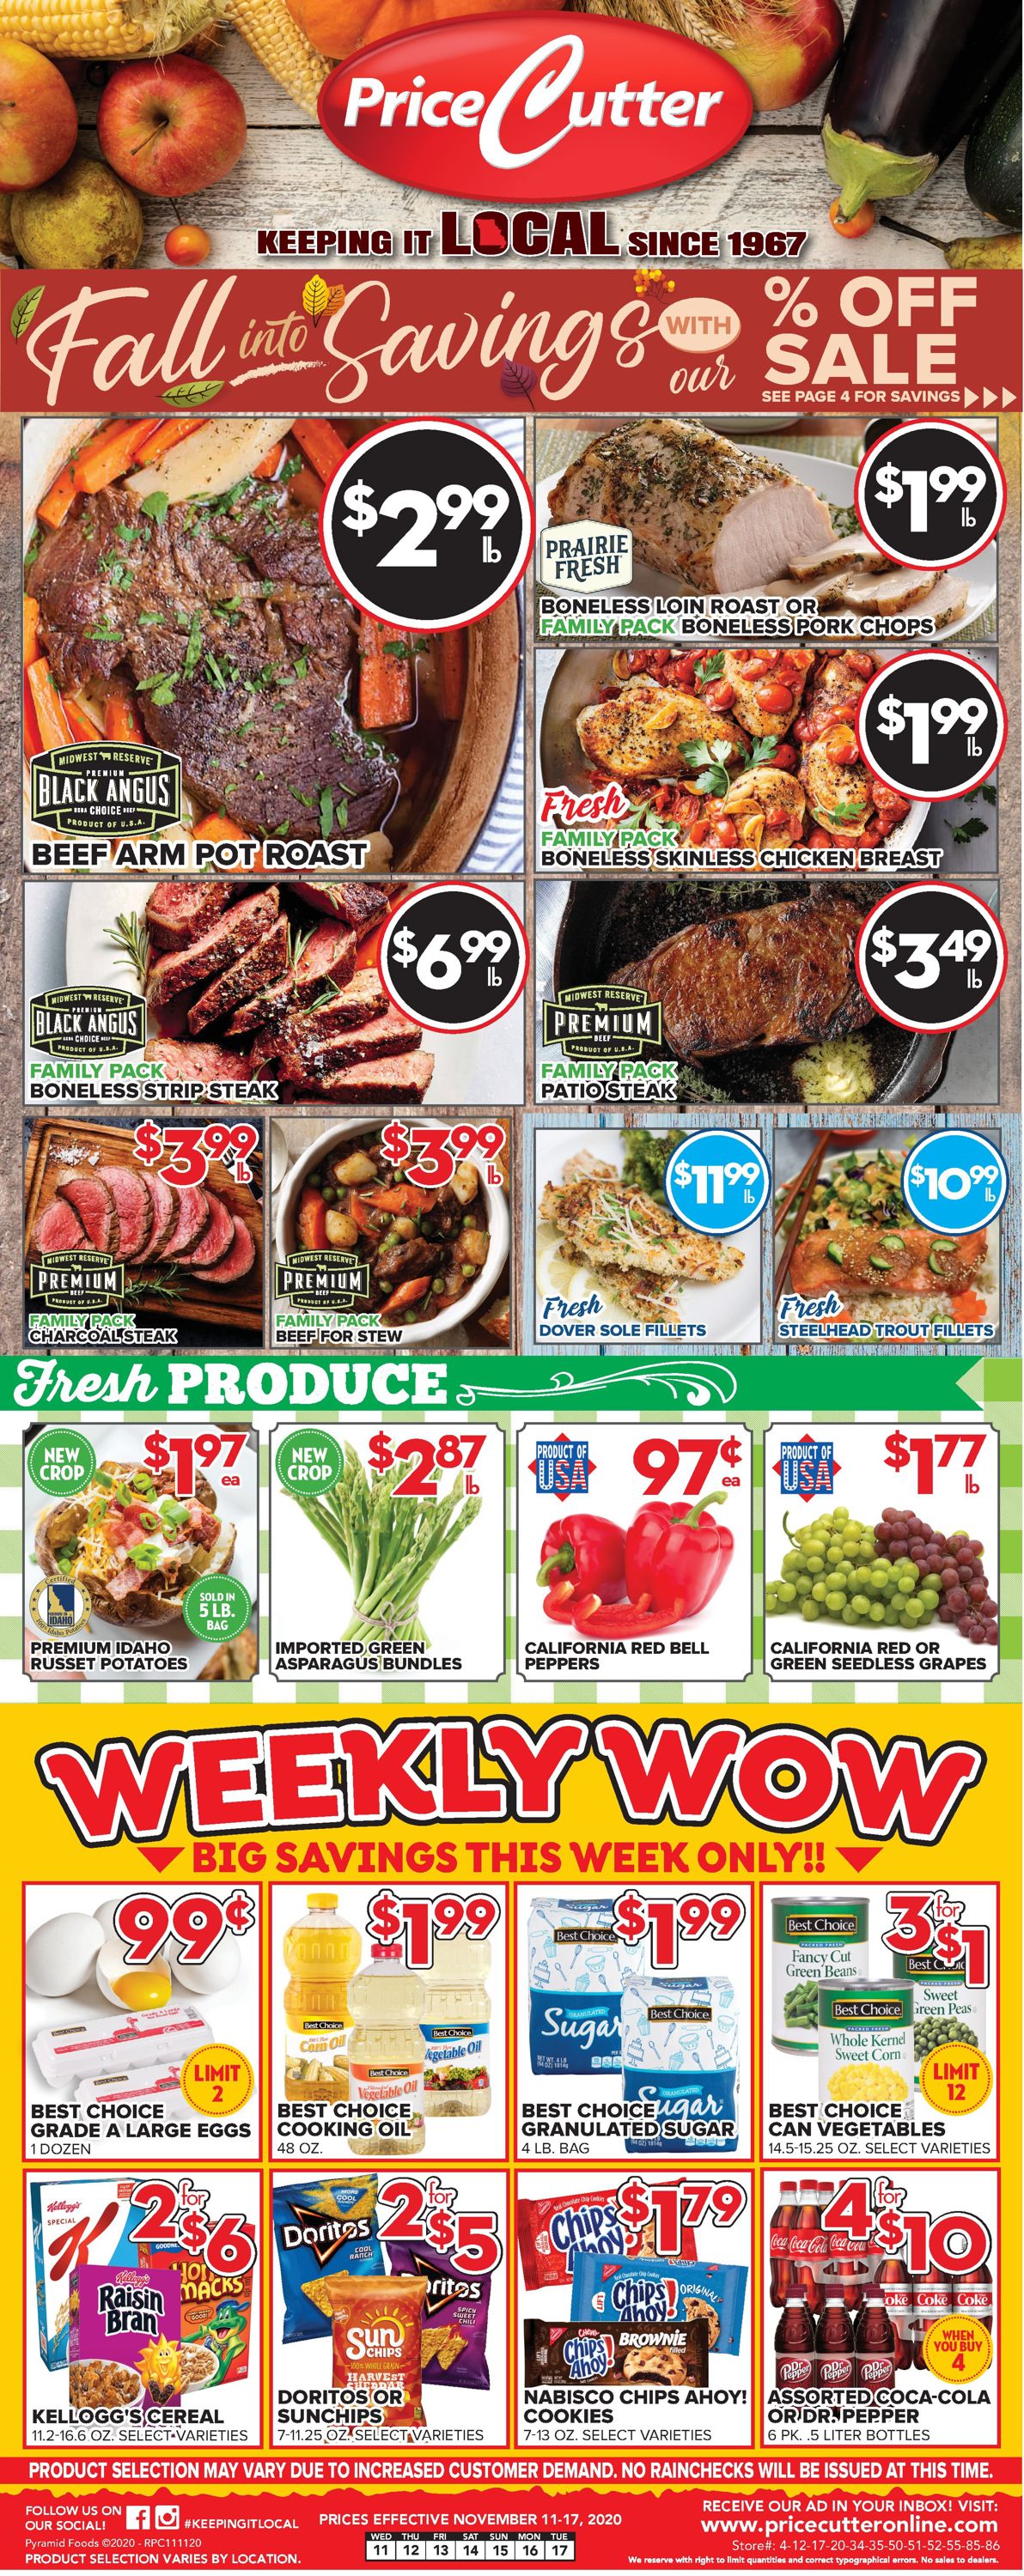 Price Cutter Weekly Ad Circular - valid 11/11-11/17/2020